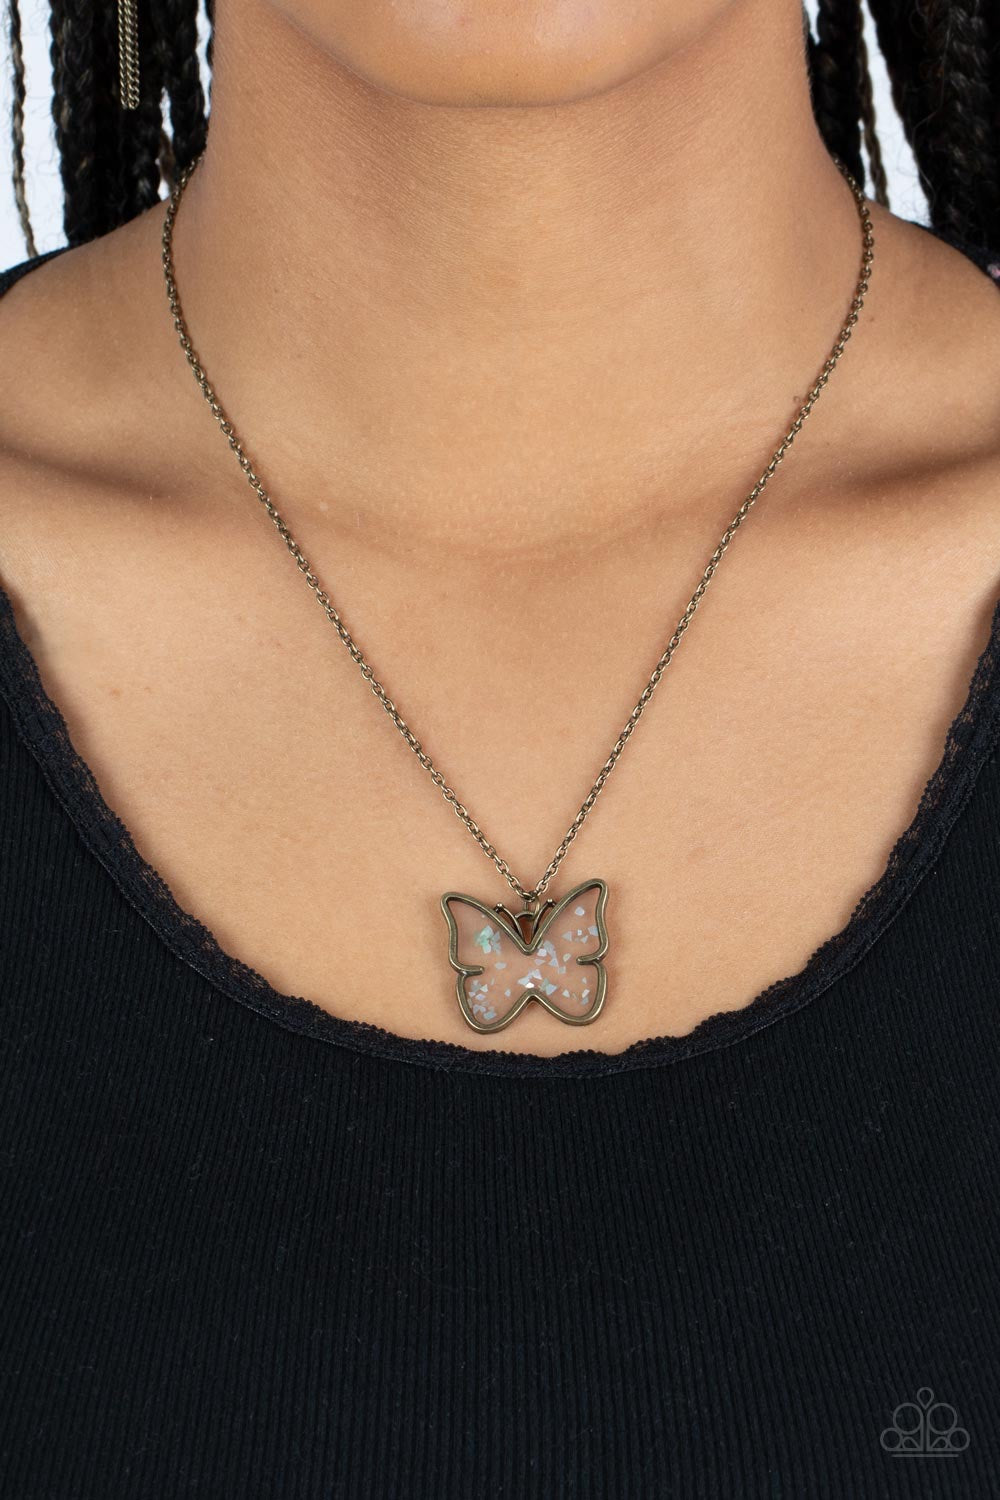 Paparazzi Gives Me Butterflies - Brass Necklace -Paparazzi Jewelry Images